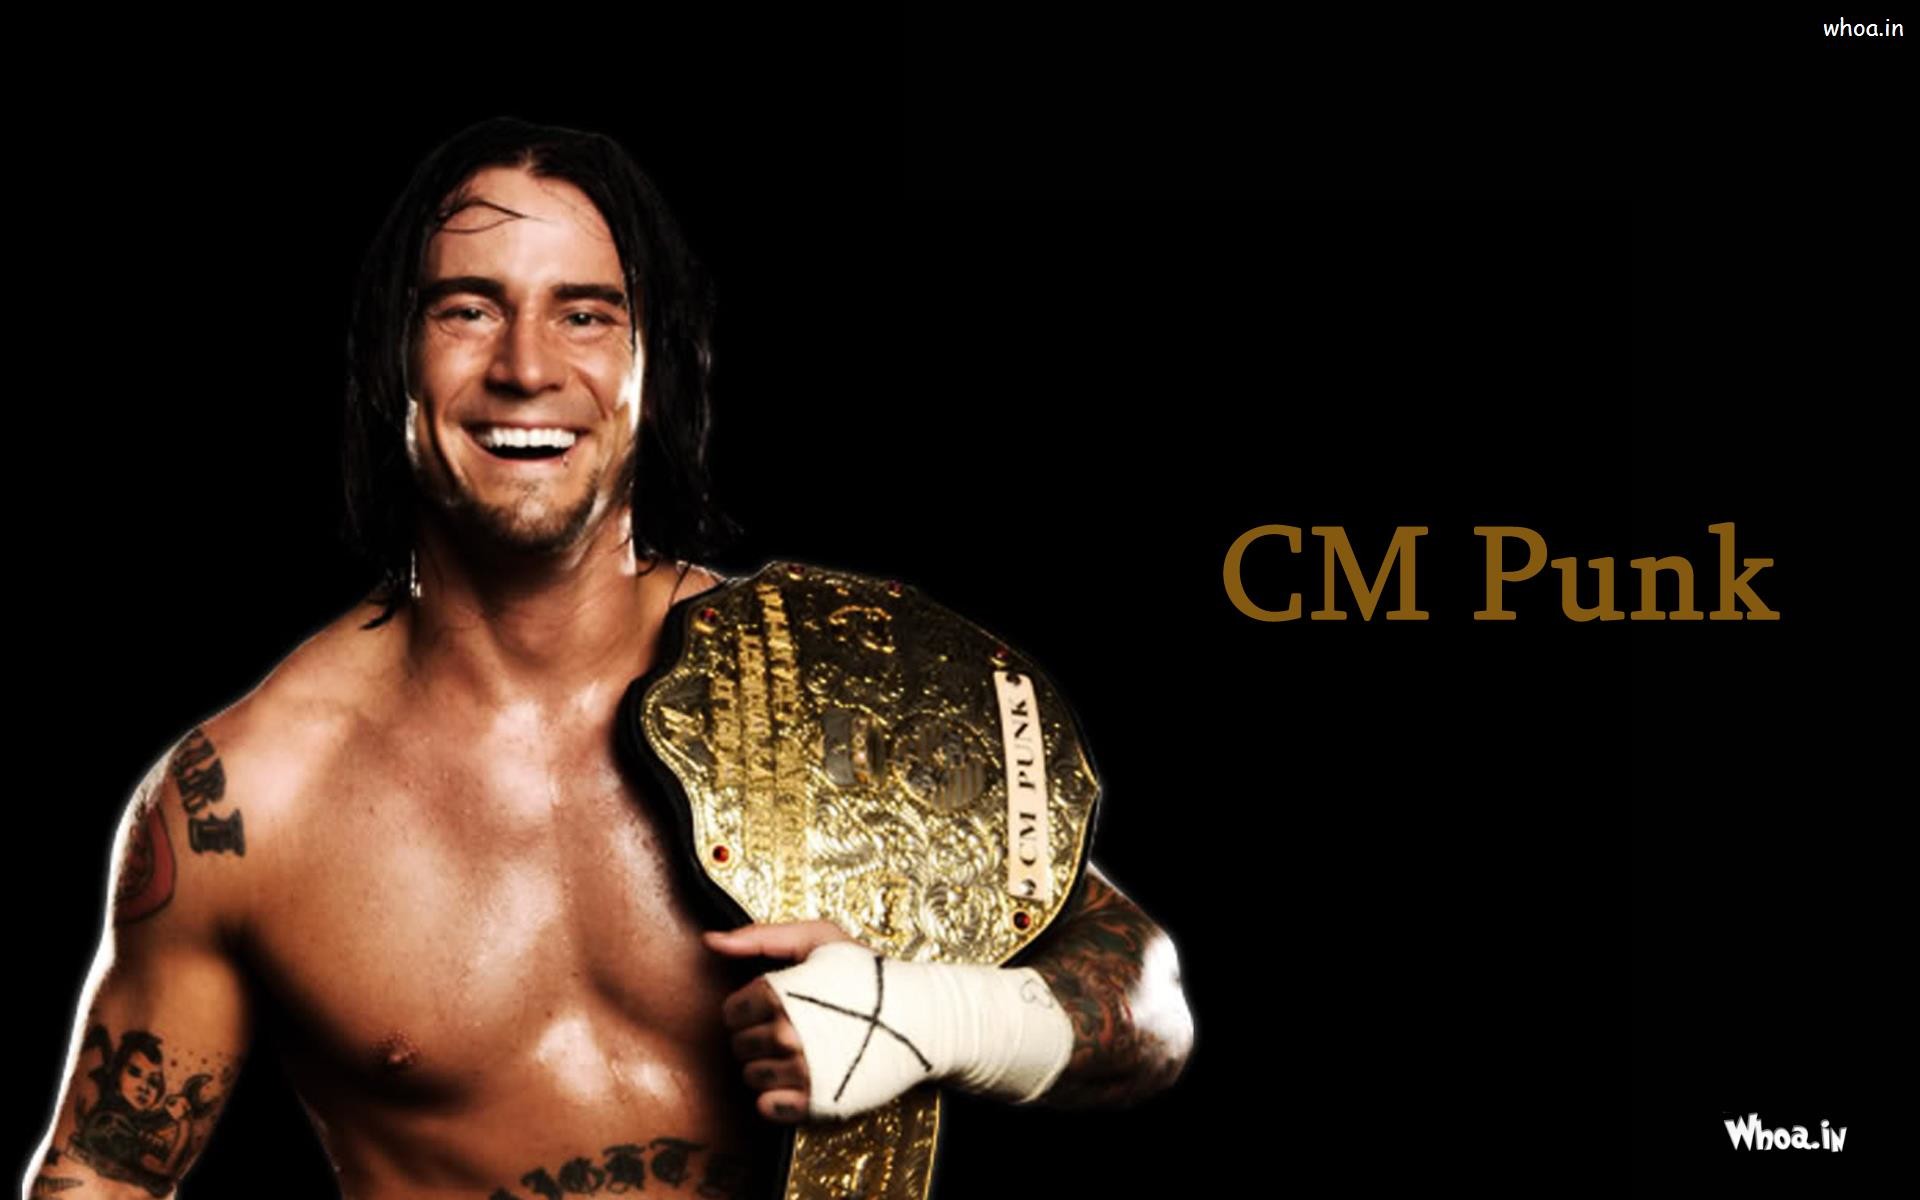 Cm Punk 2018 Best in the World Wallpaper (70+ images)